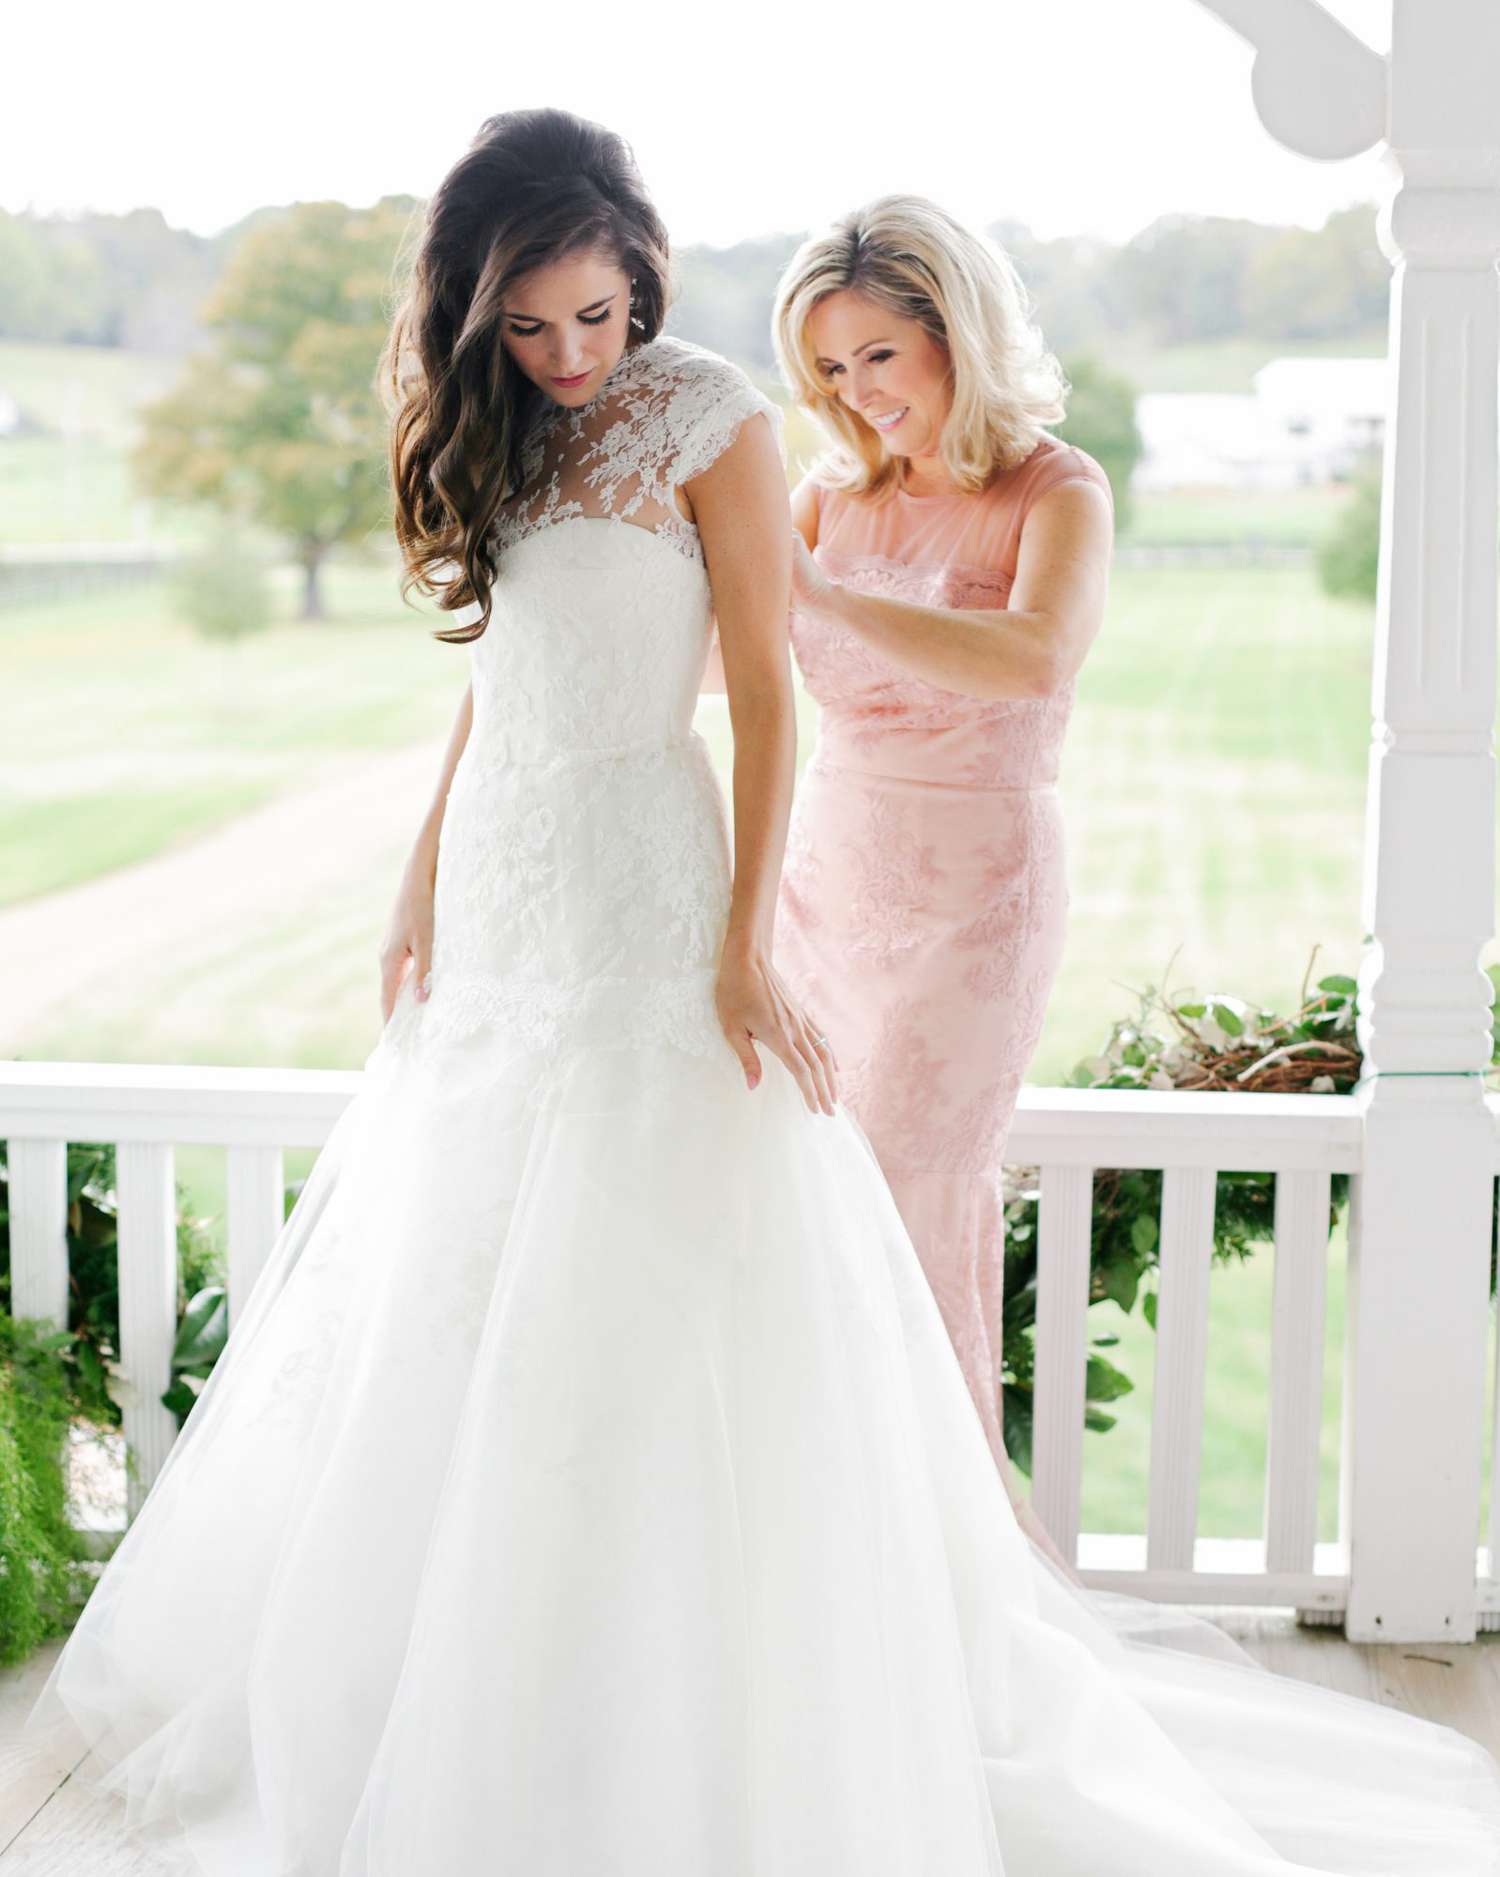 mother of the bride flowy dresses